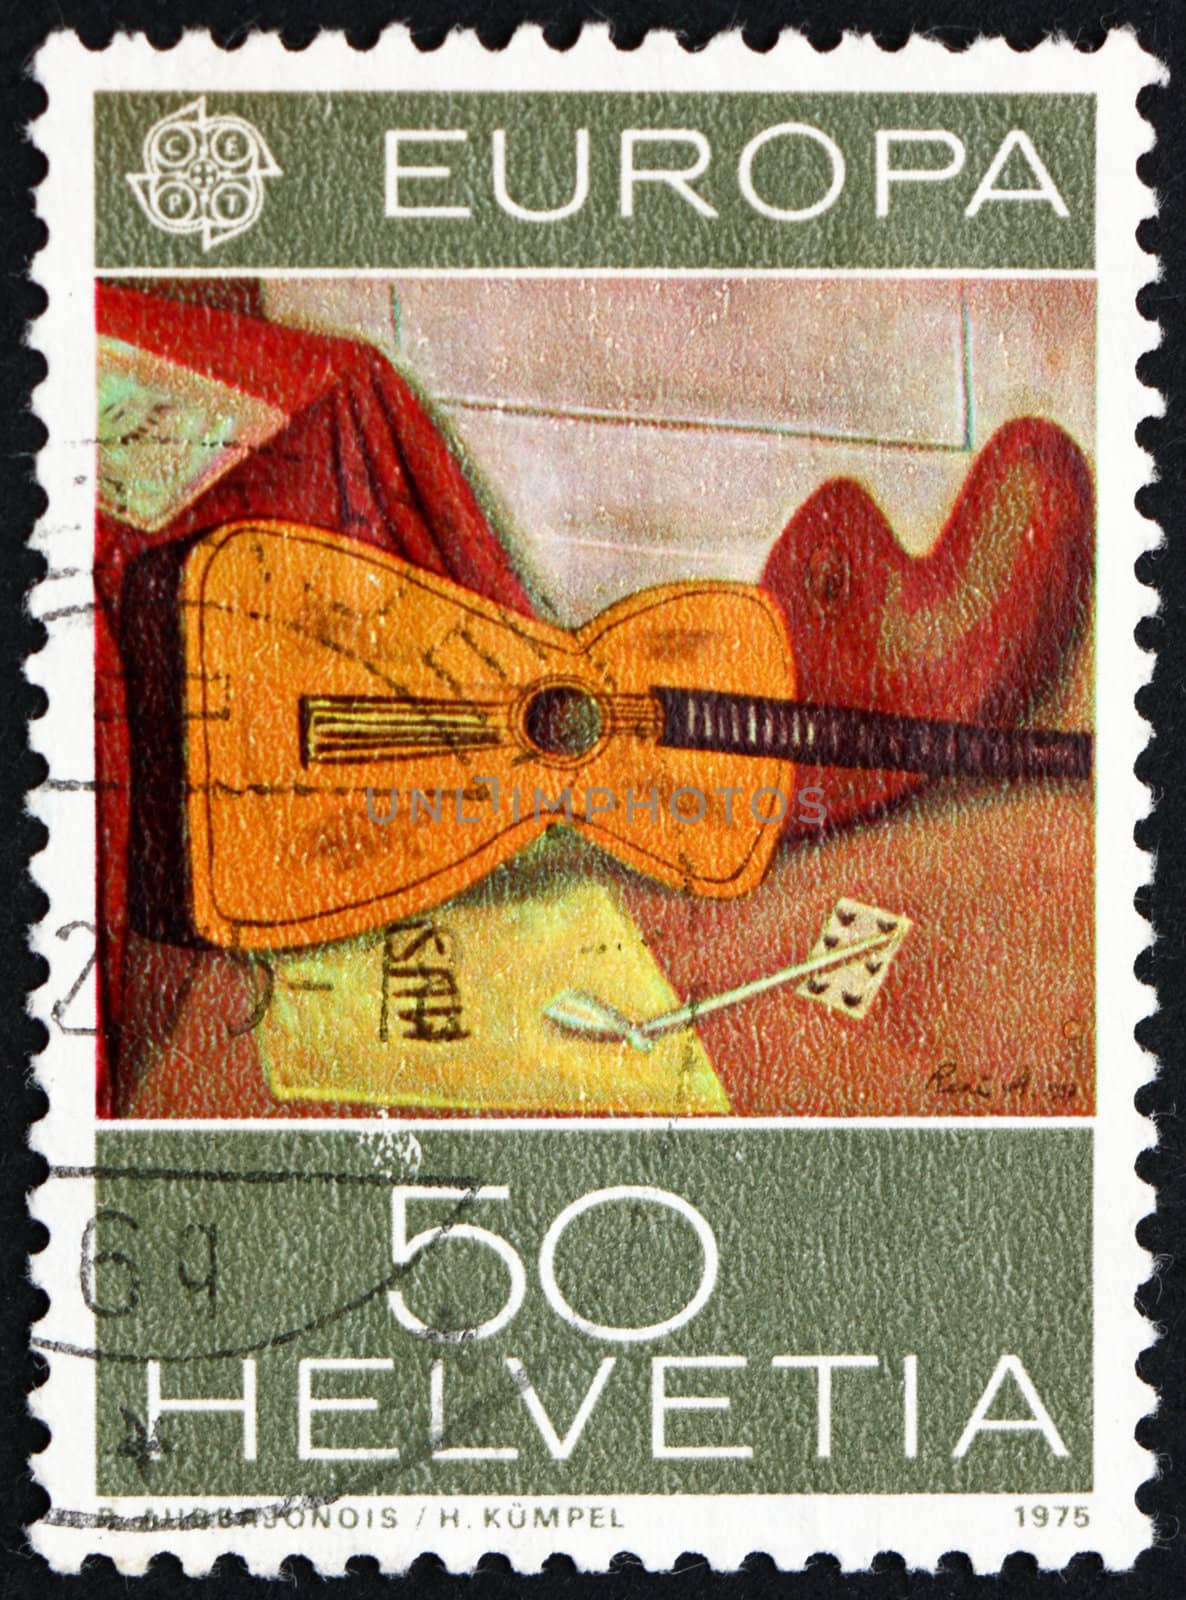 SWITZERLAND - CIRCA 1975: a stamp printed in the Switzerland shows Still Life with Guitar, Painting by Rene Auberjonois, circa 1975